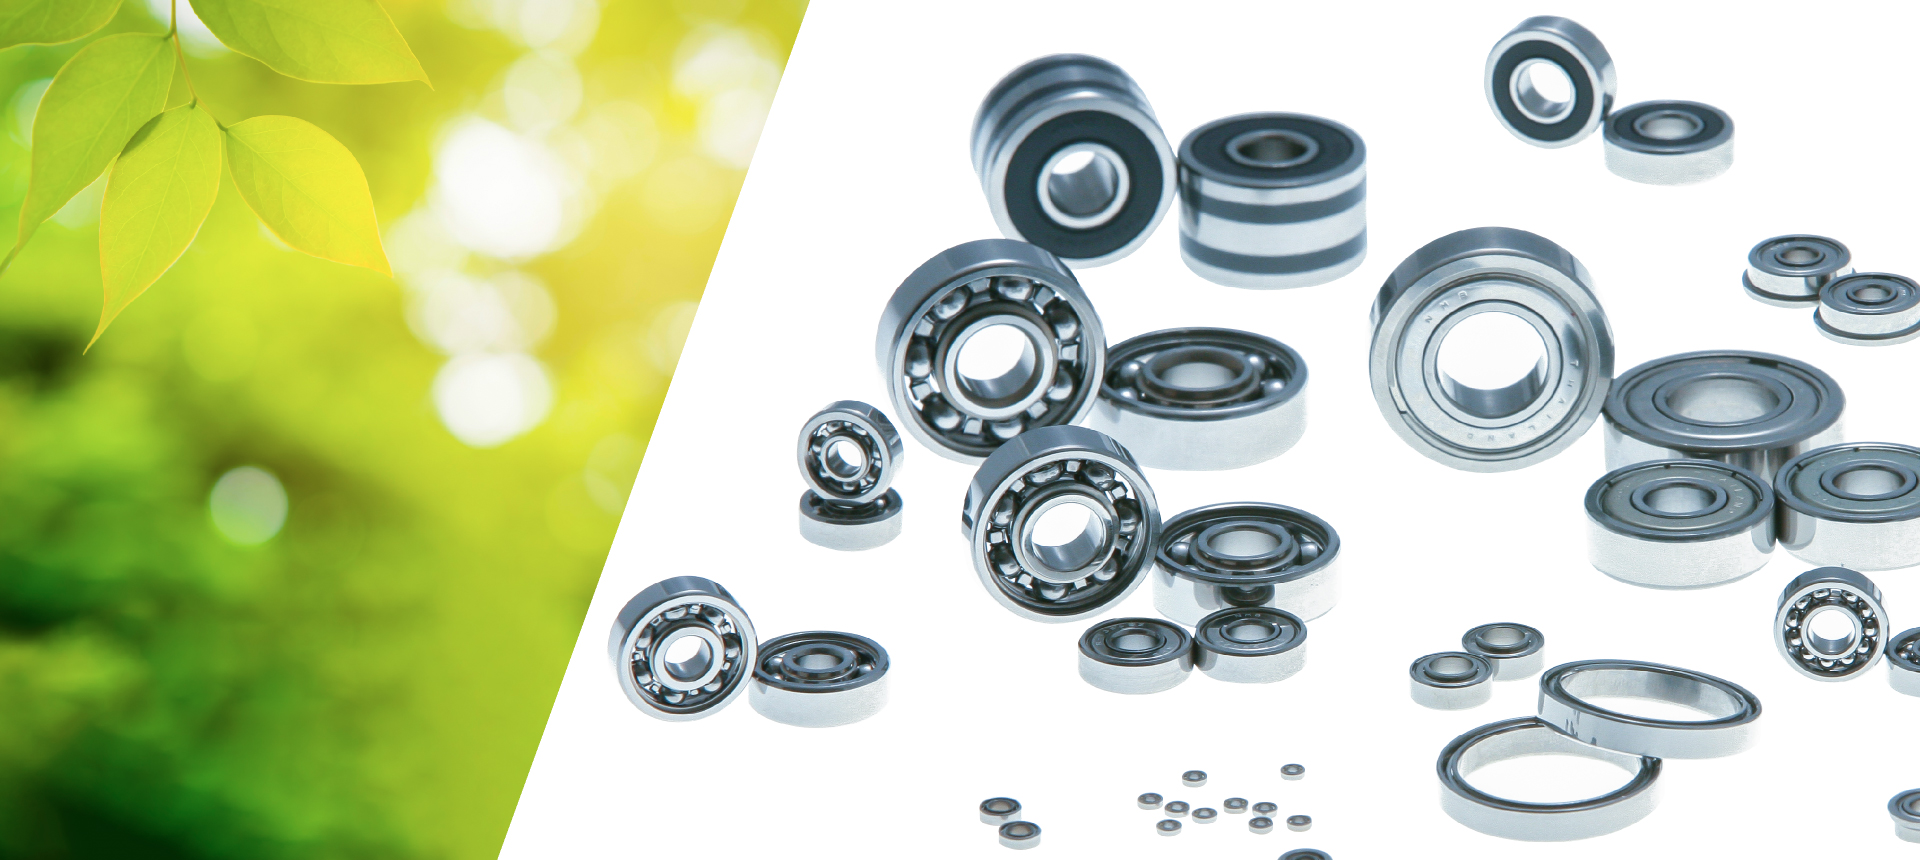 MinebeaMitsumi Ultra-precision manufacturing technology delivers ultra-precision NMB ball bearings